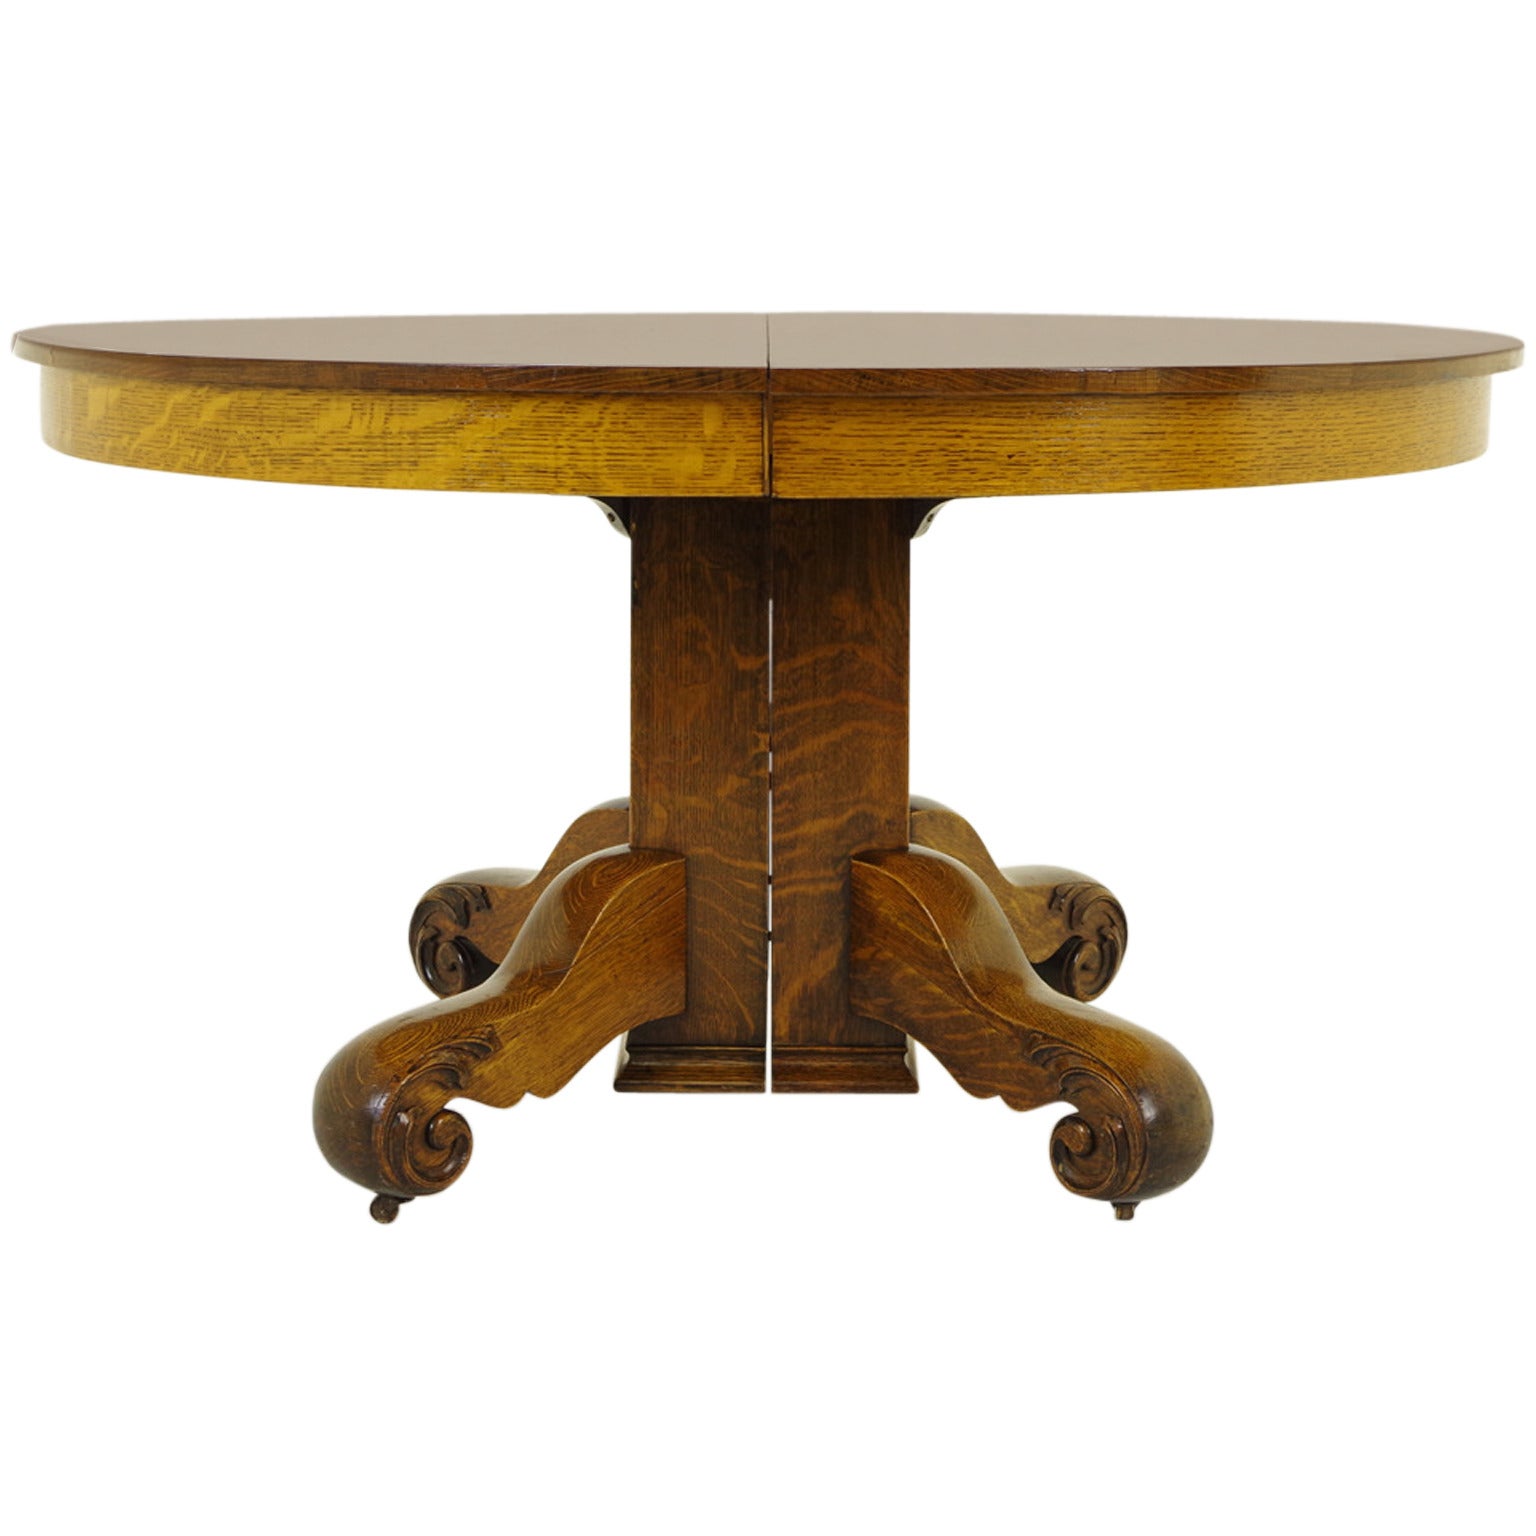 Round Oak Split Pedestal Dining Table with Four Leaves, 1910